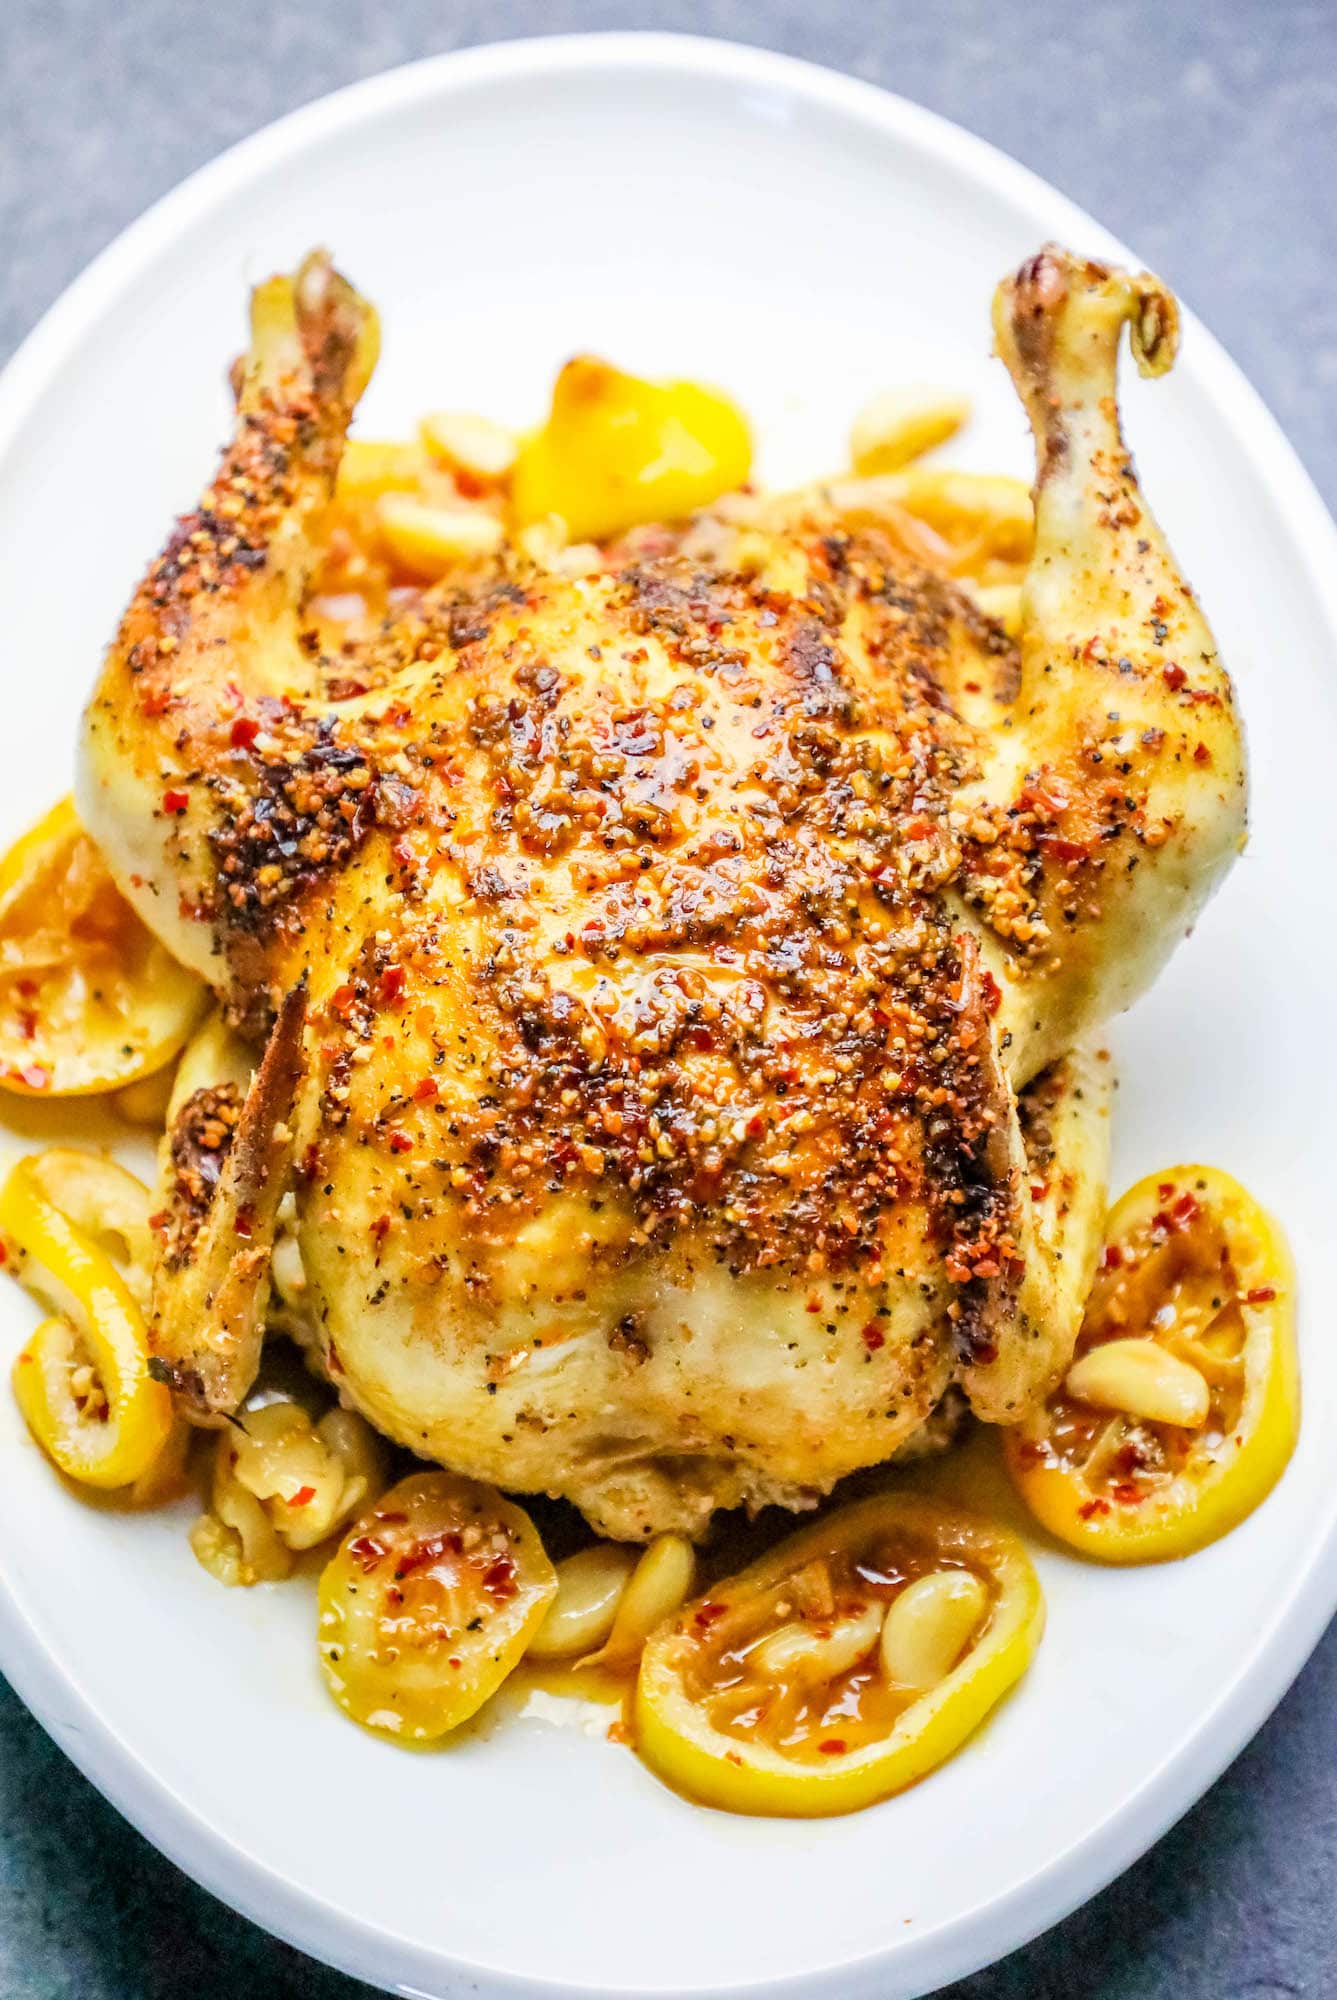 Instant Pot Montreal Chicken - The Healthy Home Cook